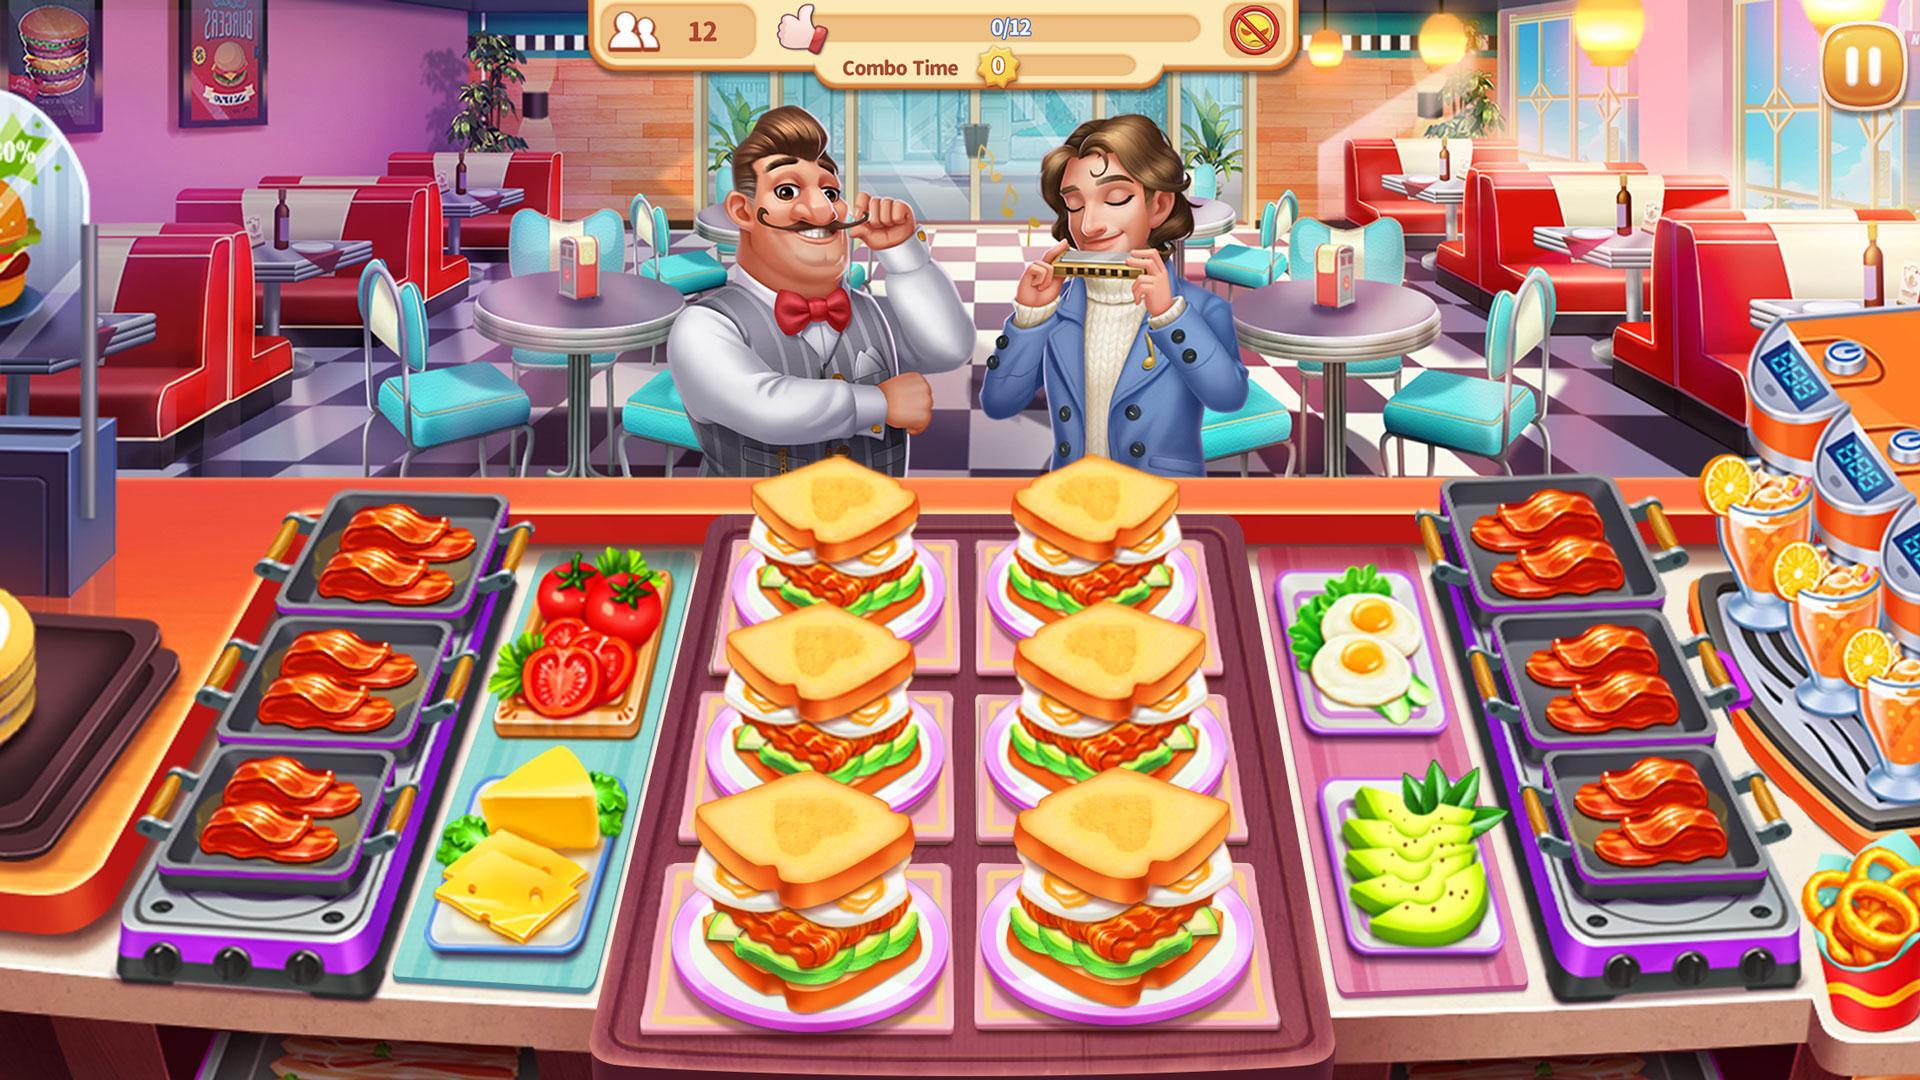 cooking madness game